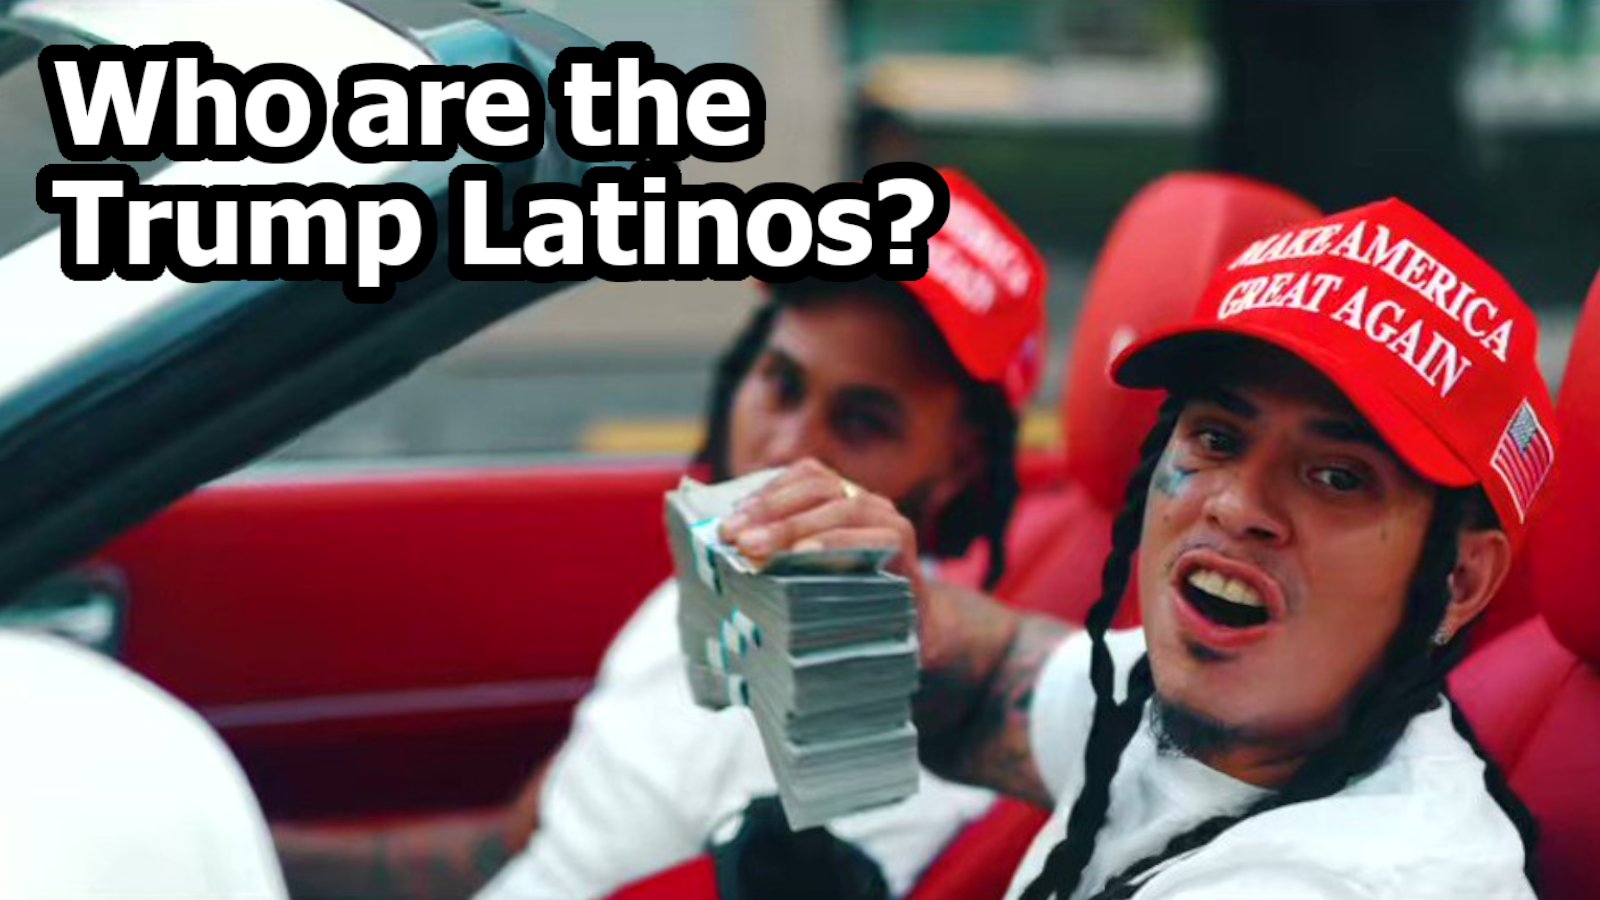 Who are the Trump Latinos?